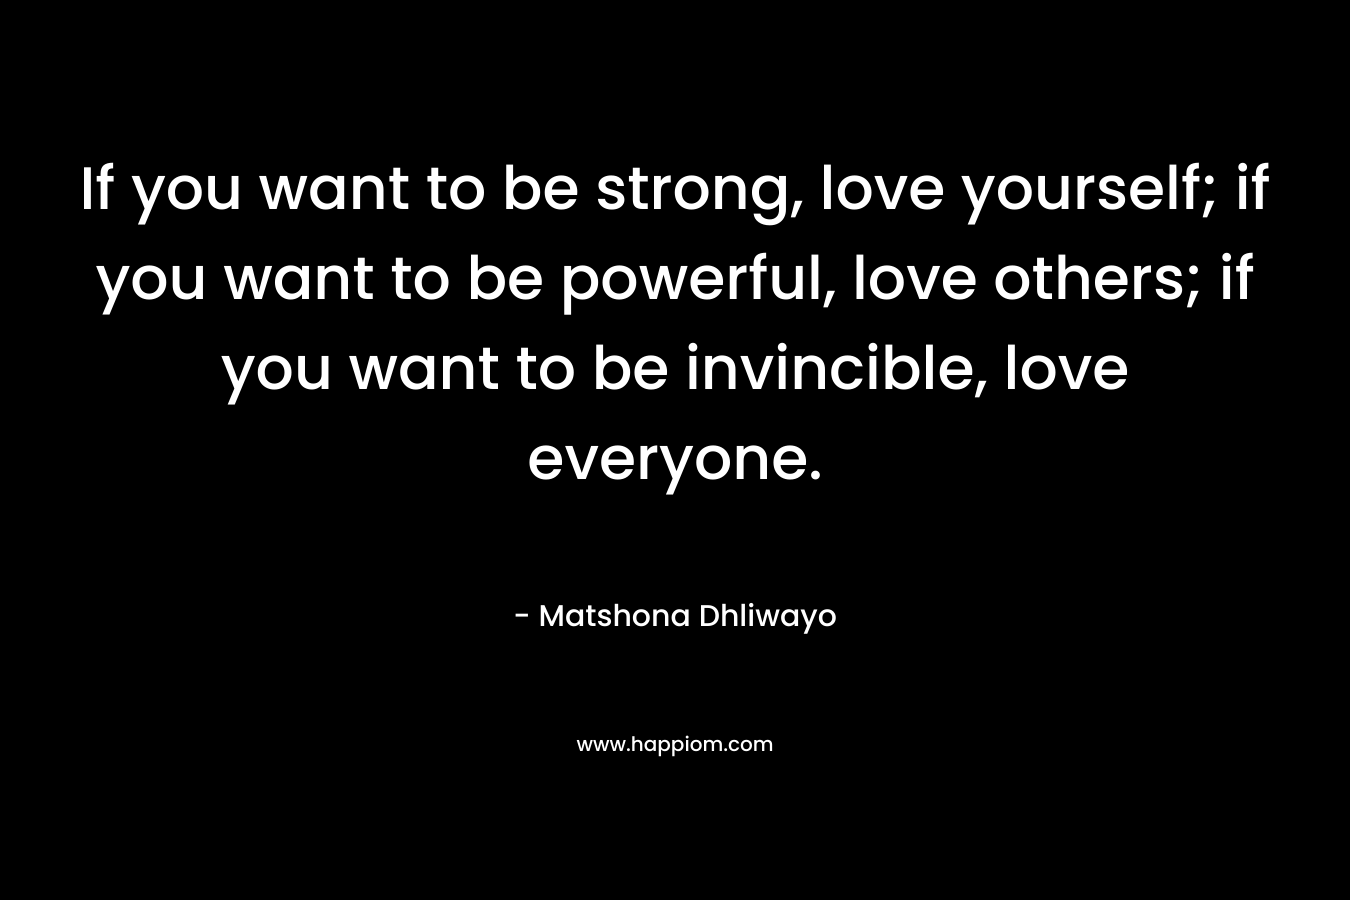 If you want to be strong, love yourself; if you want to be powerful, love others; if you want to be invincible, love everyone.